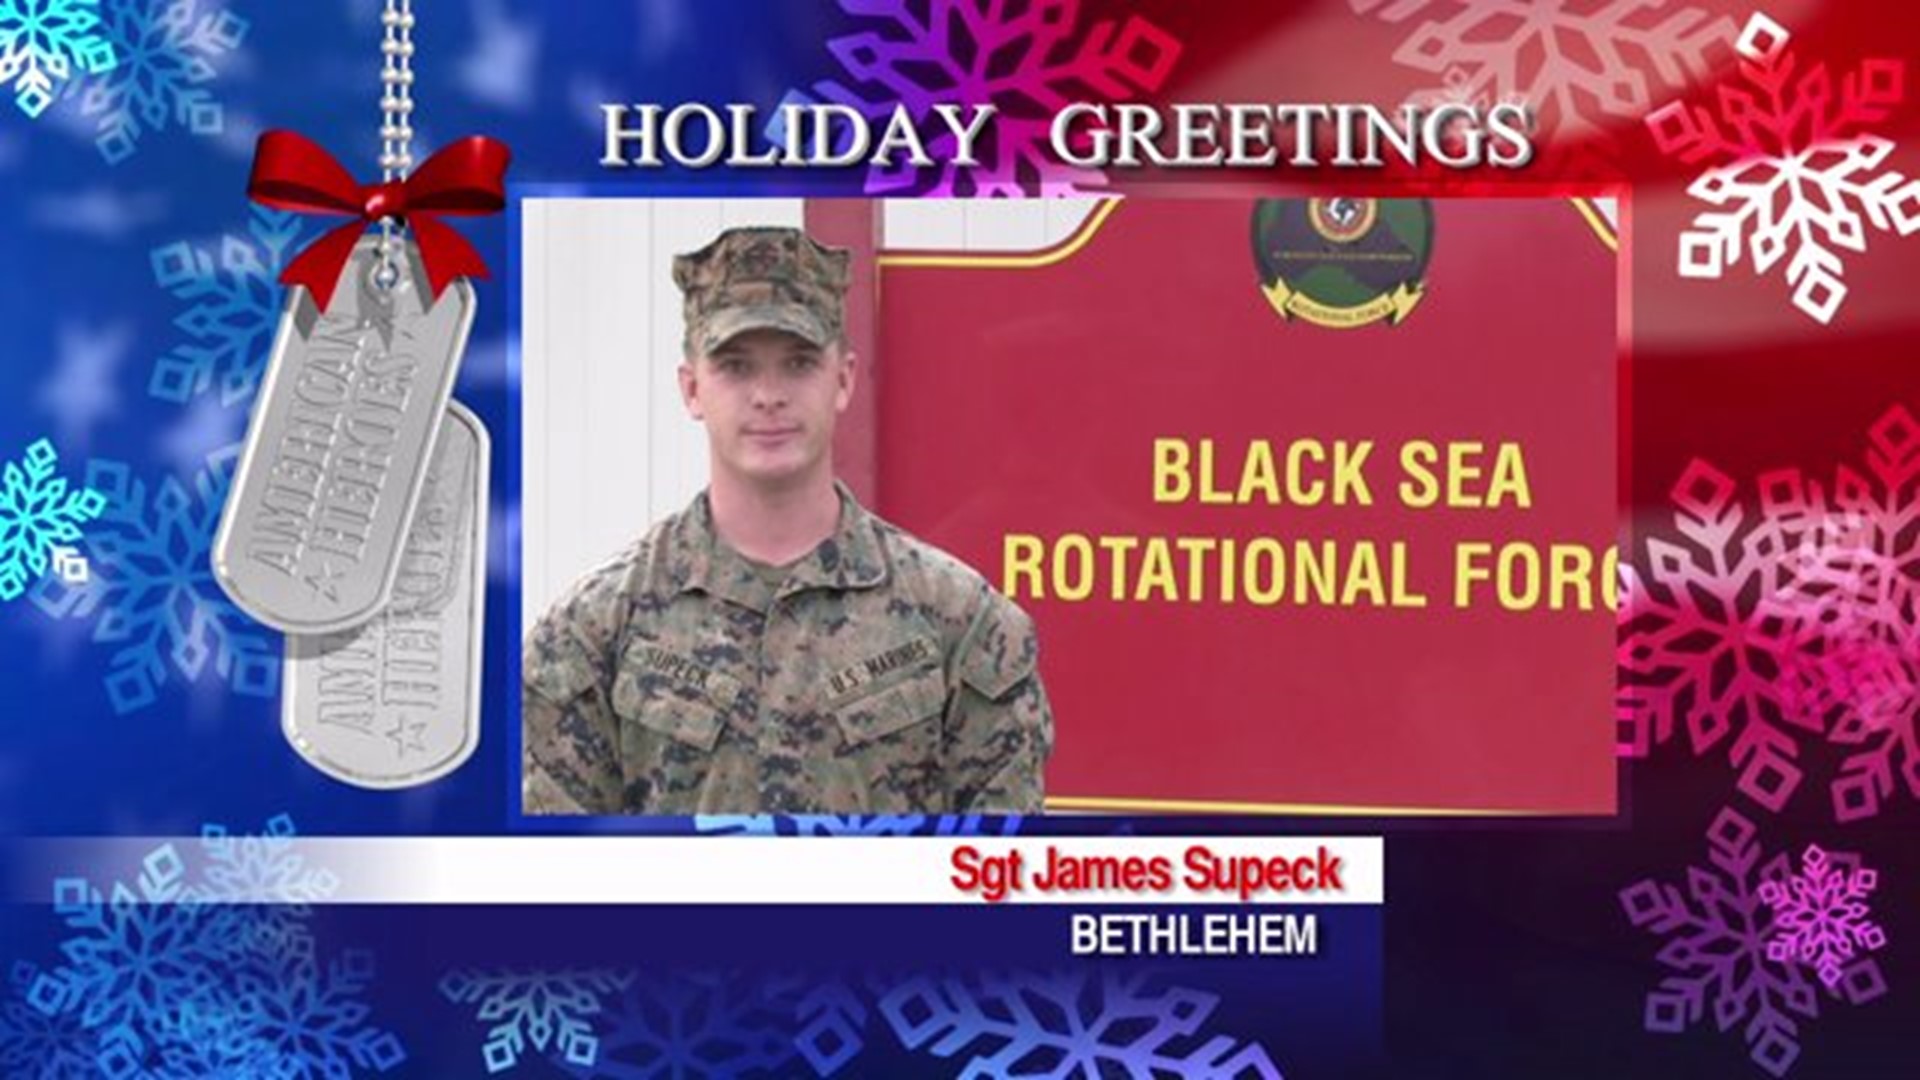 Military Greeting: Sgt James Supeck